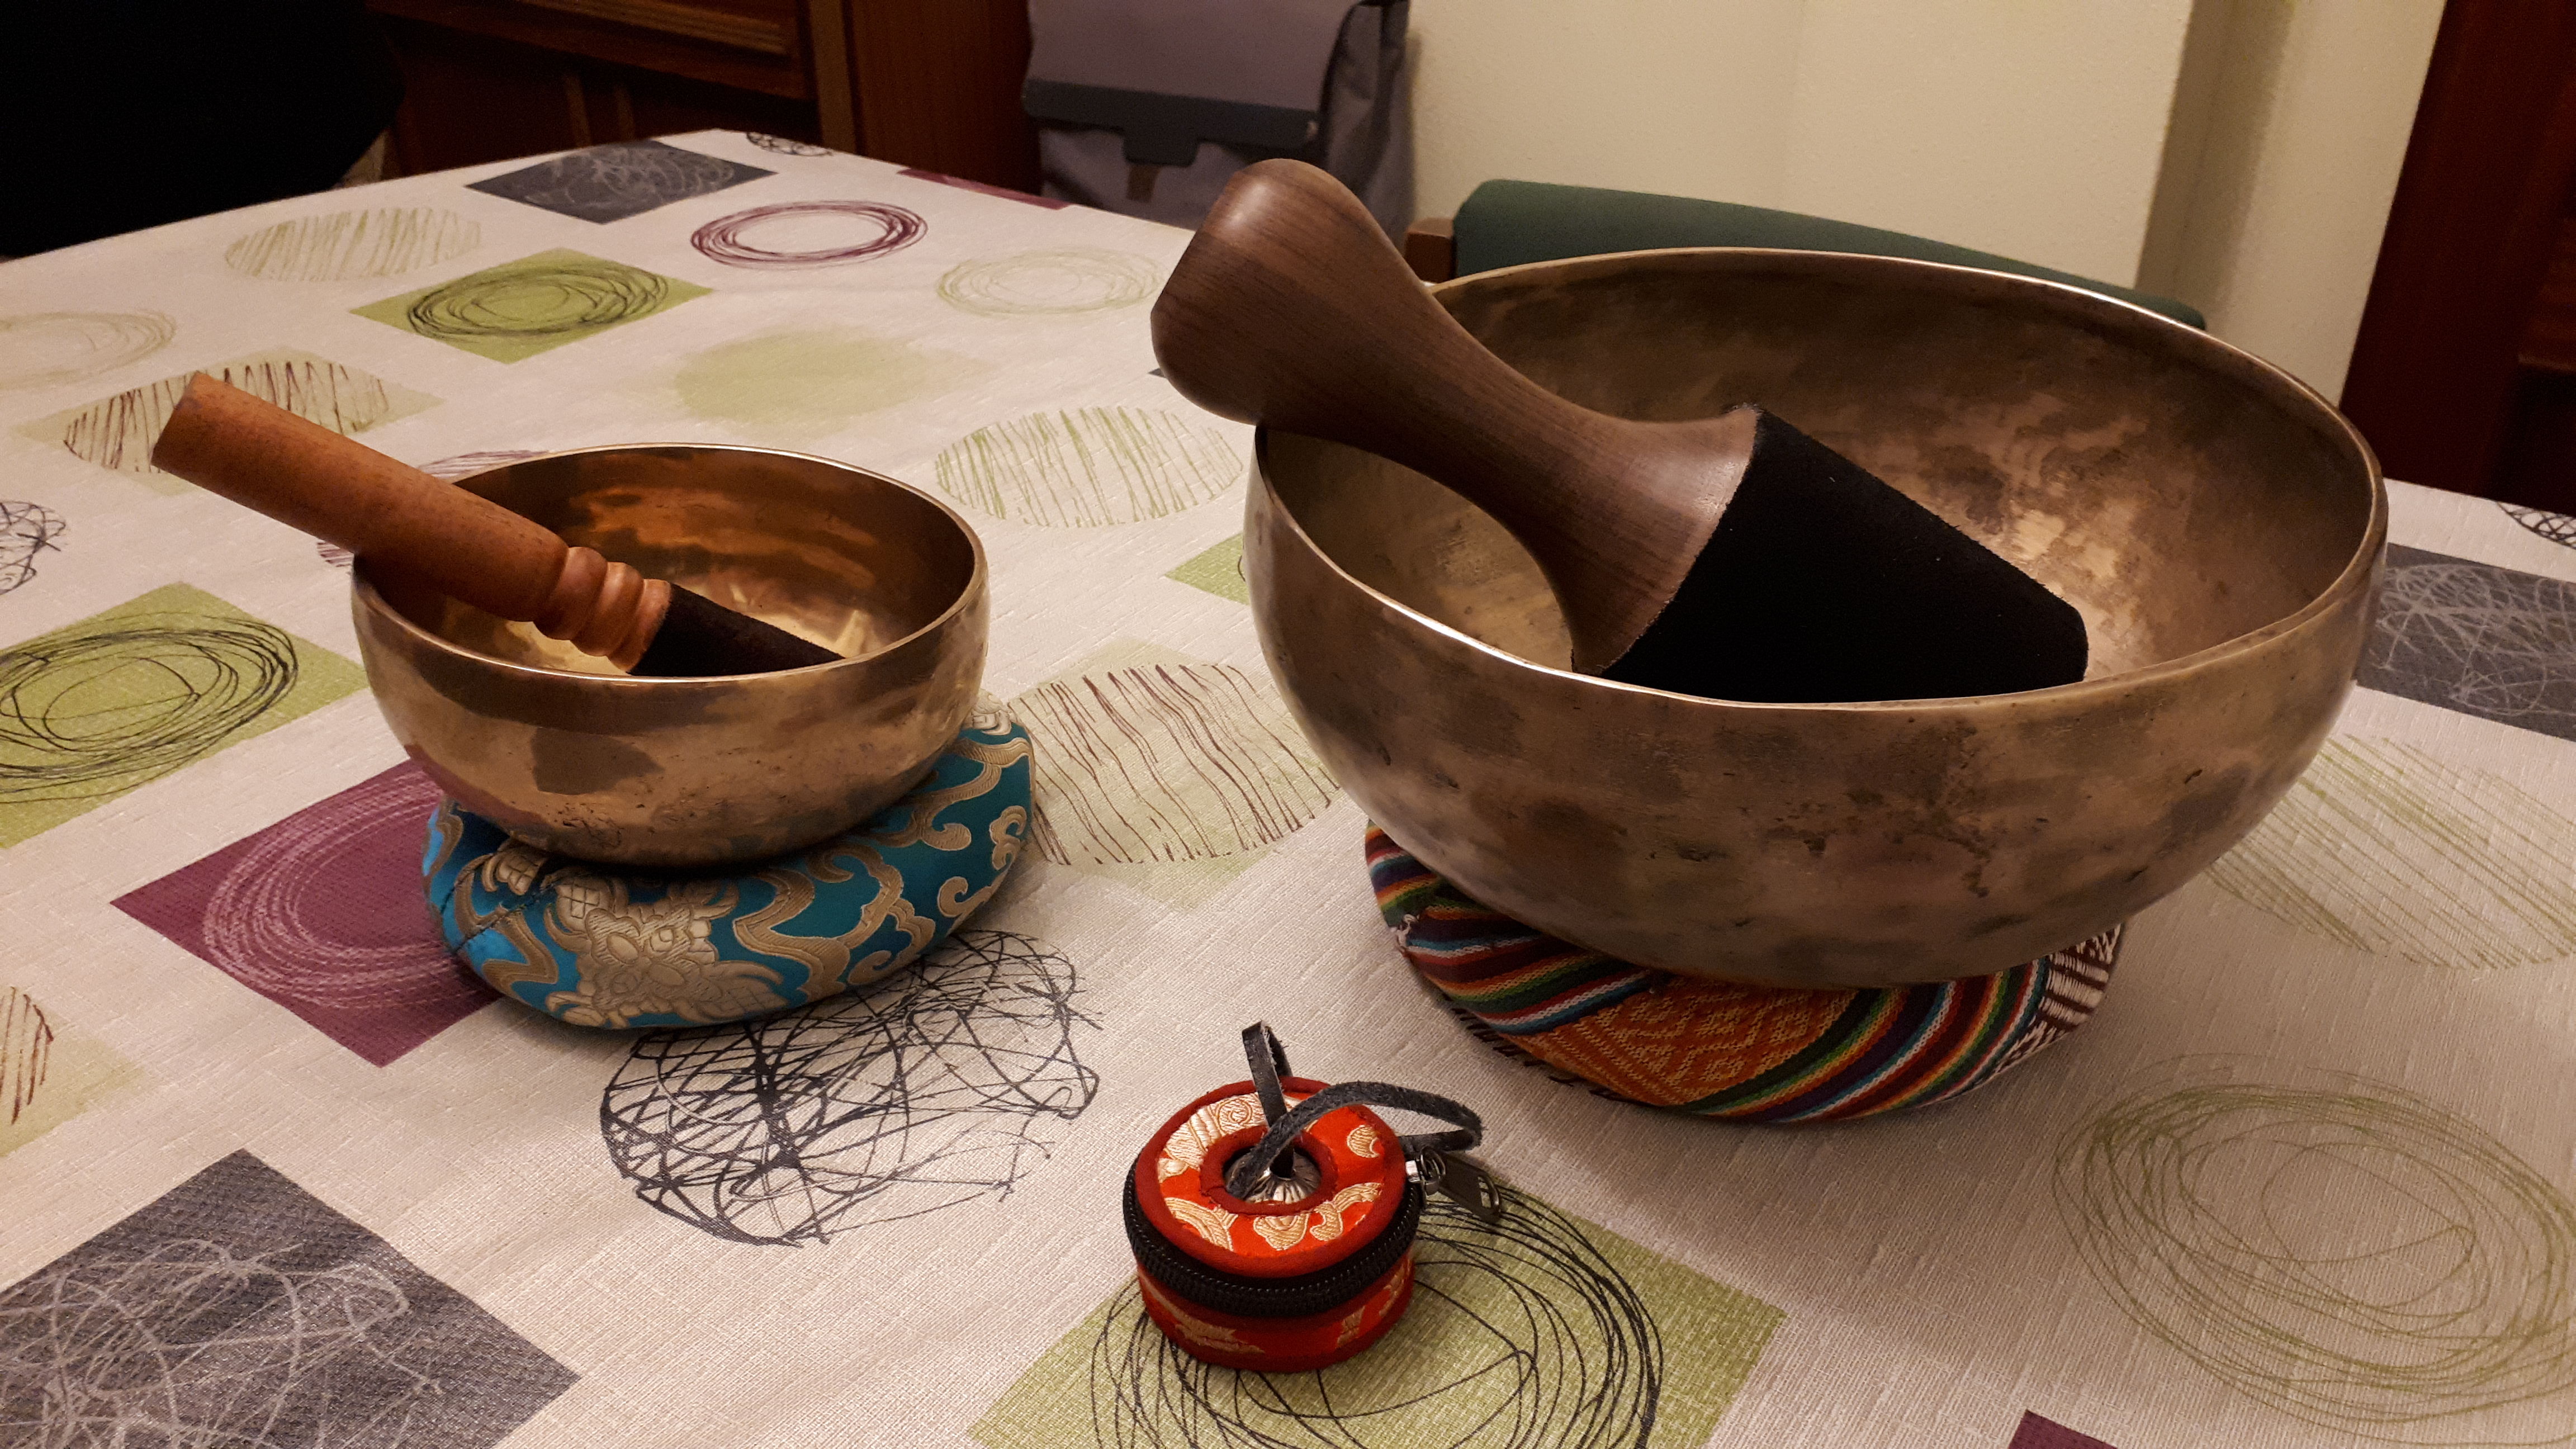 Singing Bowls Pounded Out By Hand - KW Professional Organizers - Wabi-Sabi